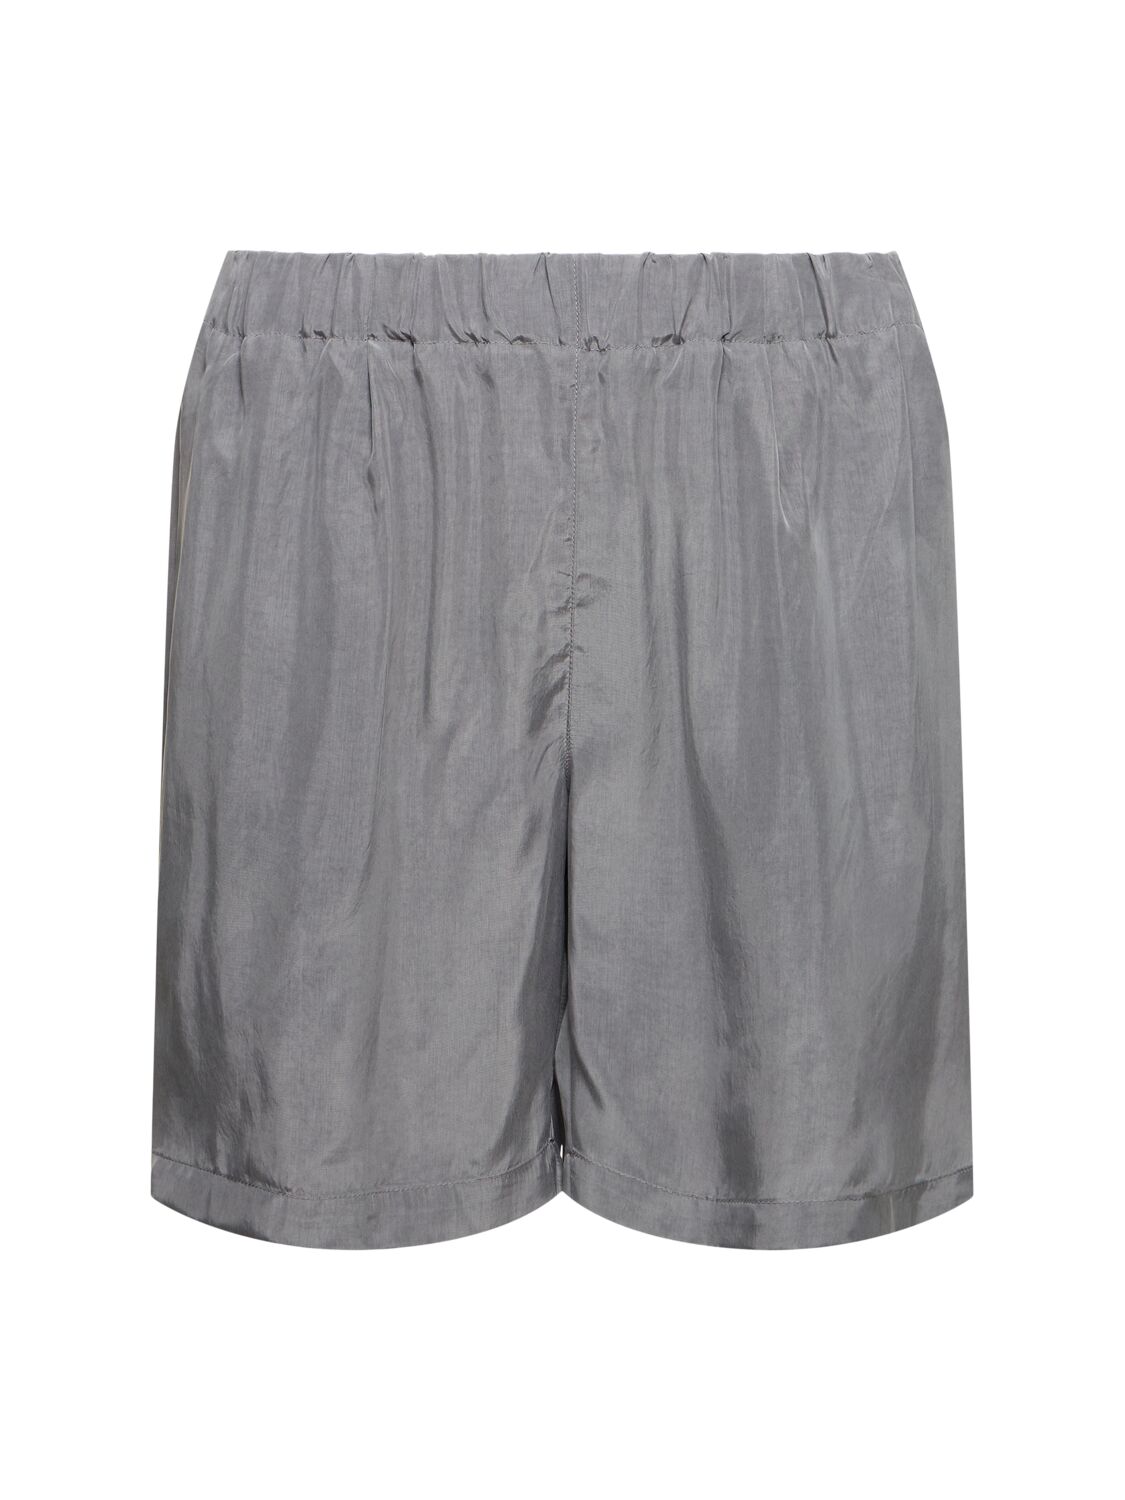 Image of Silky Cupro Jogging Shorts